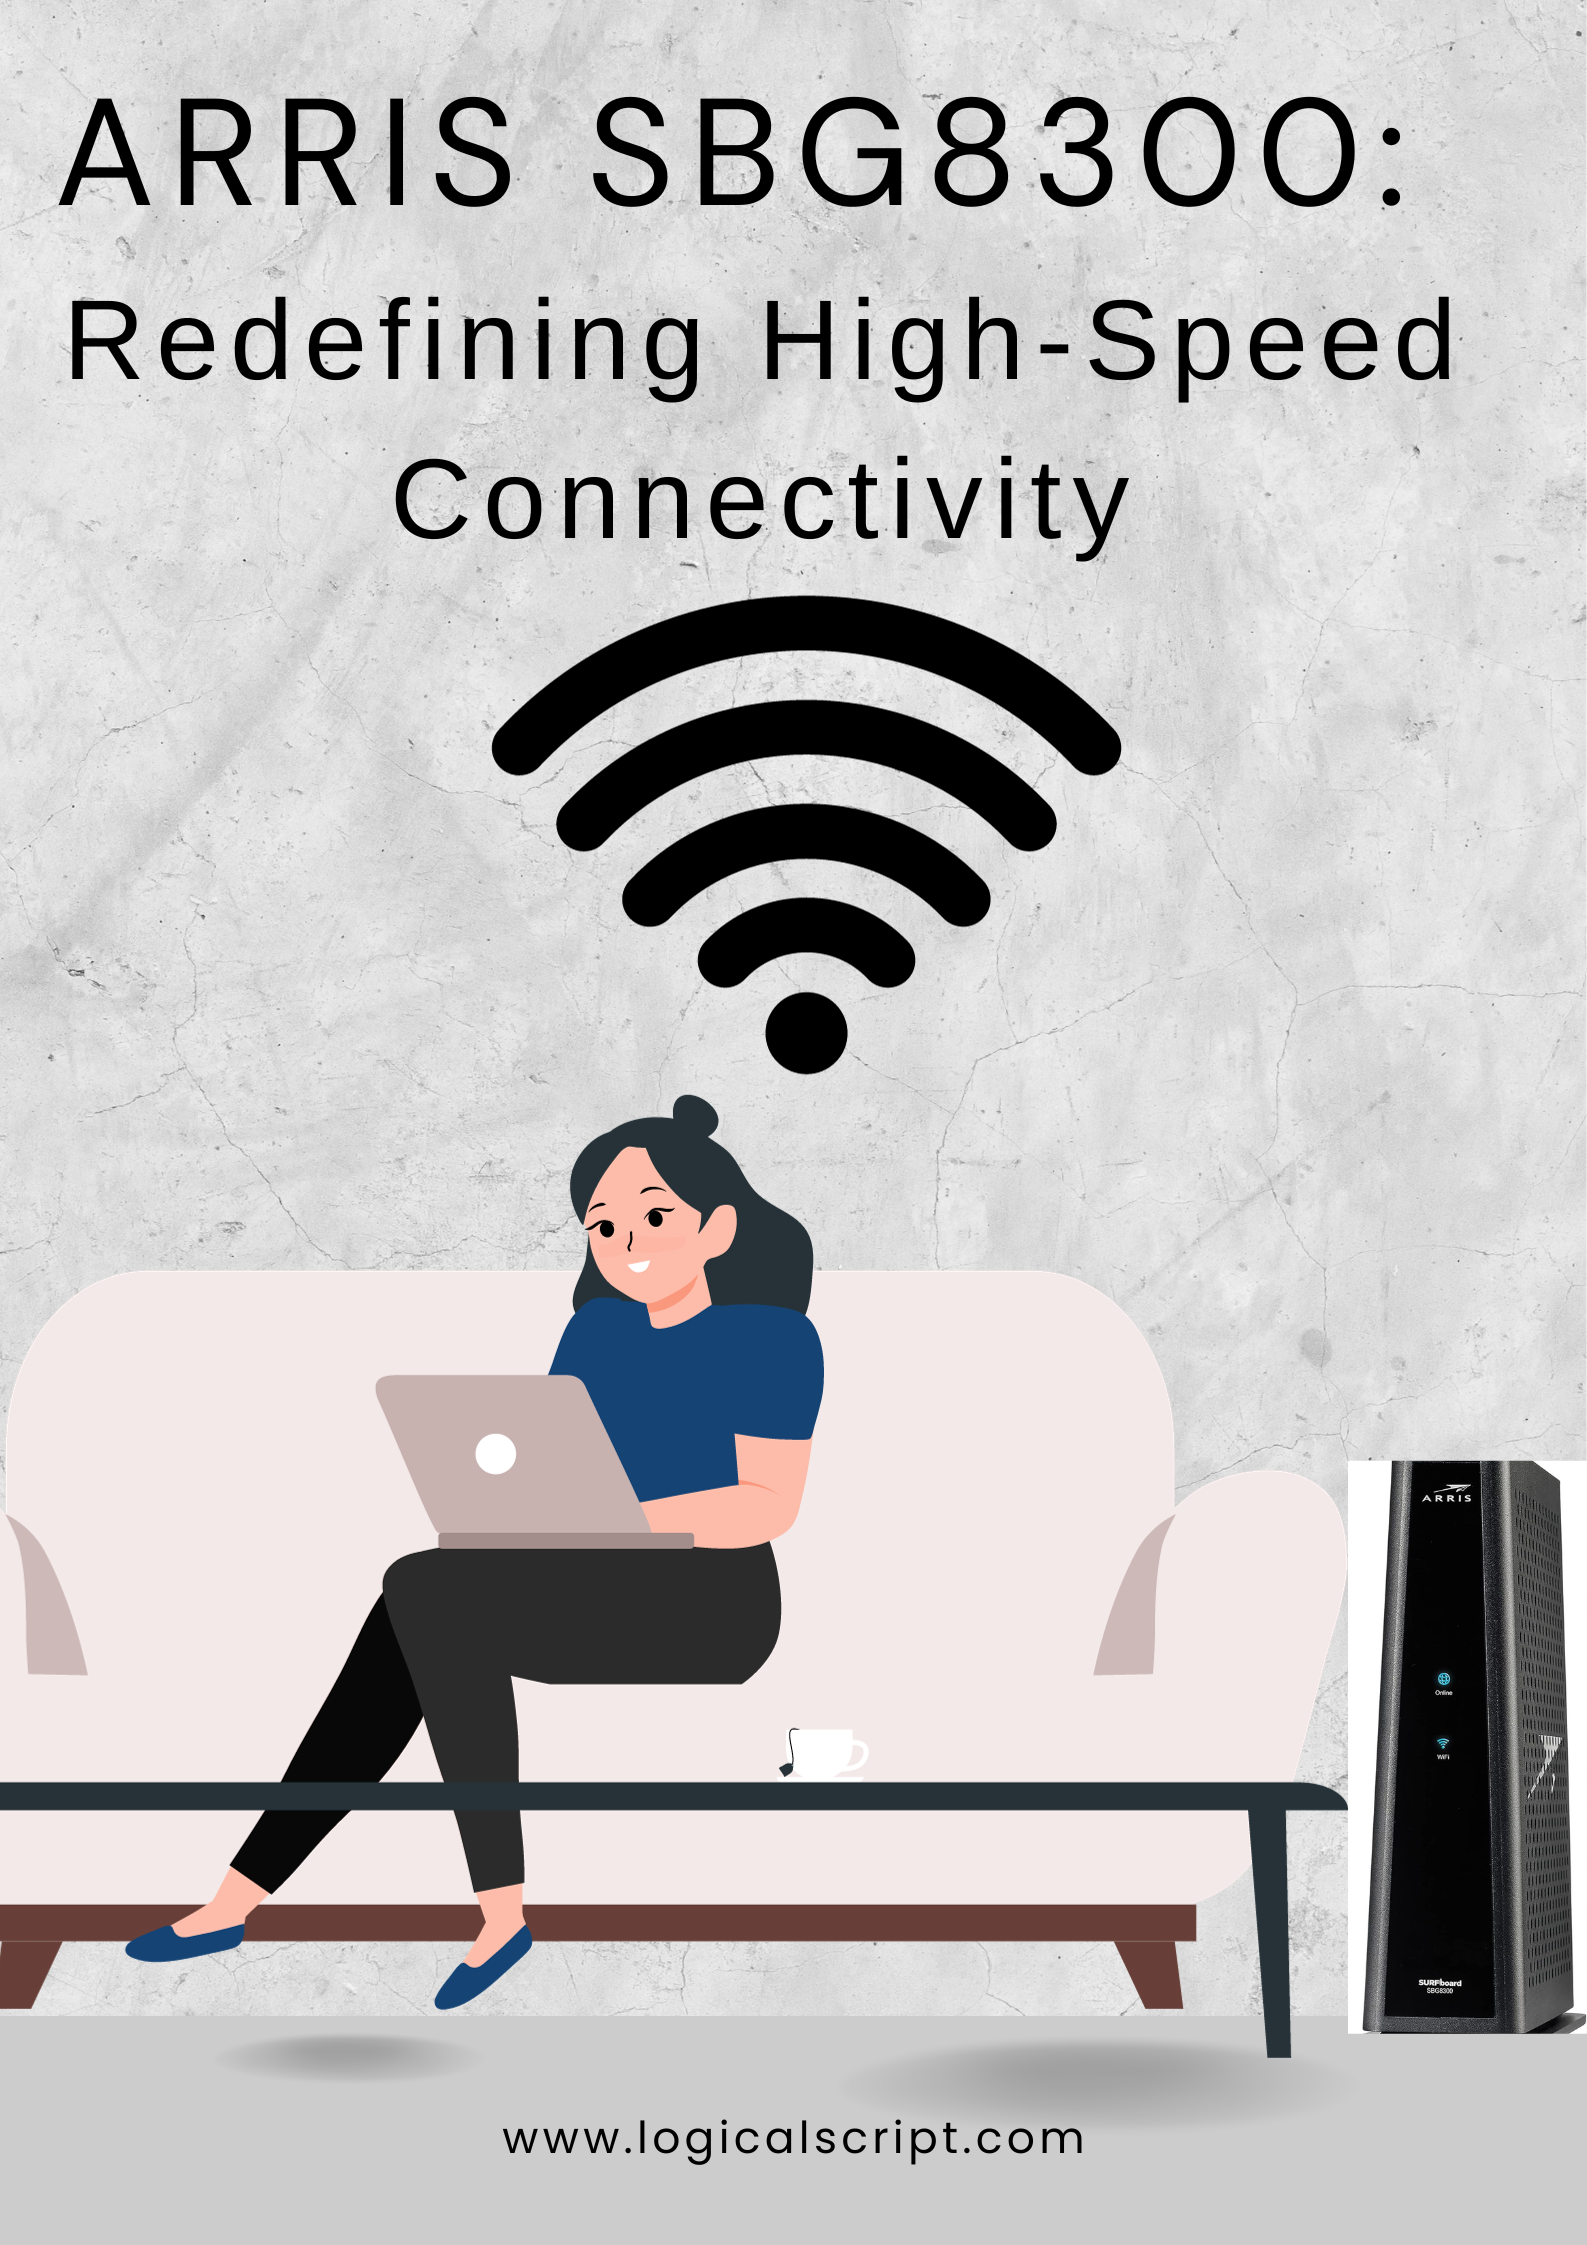 Your paragraph ARRIS SBG8300: Redefining High-Speed Connectivity